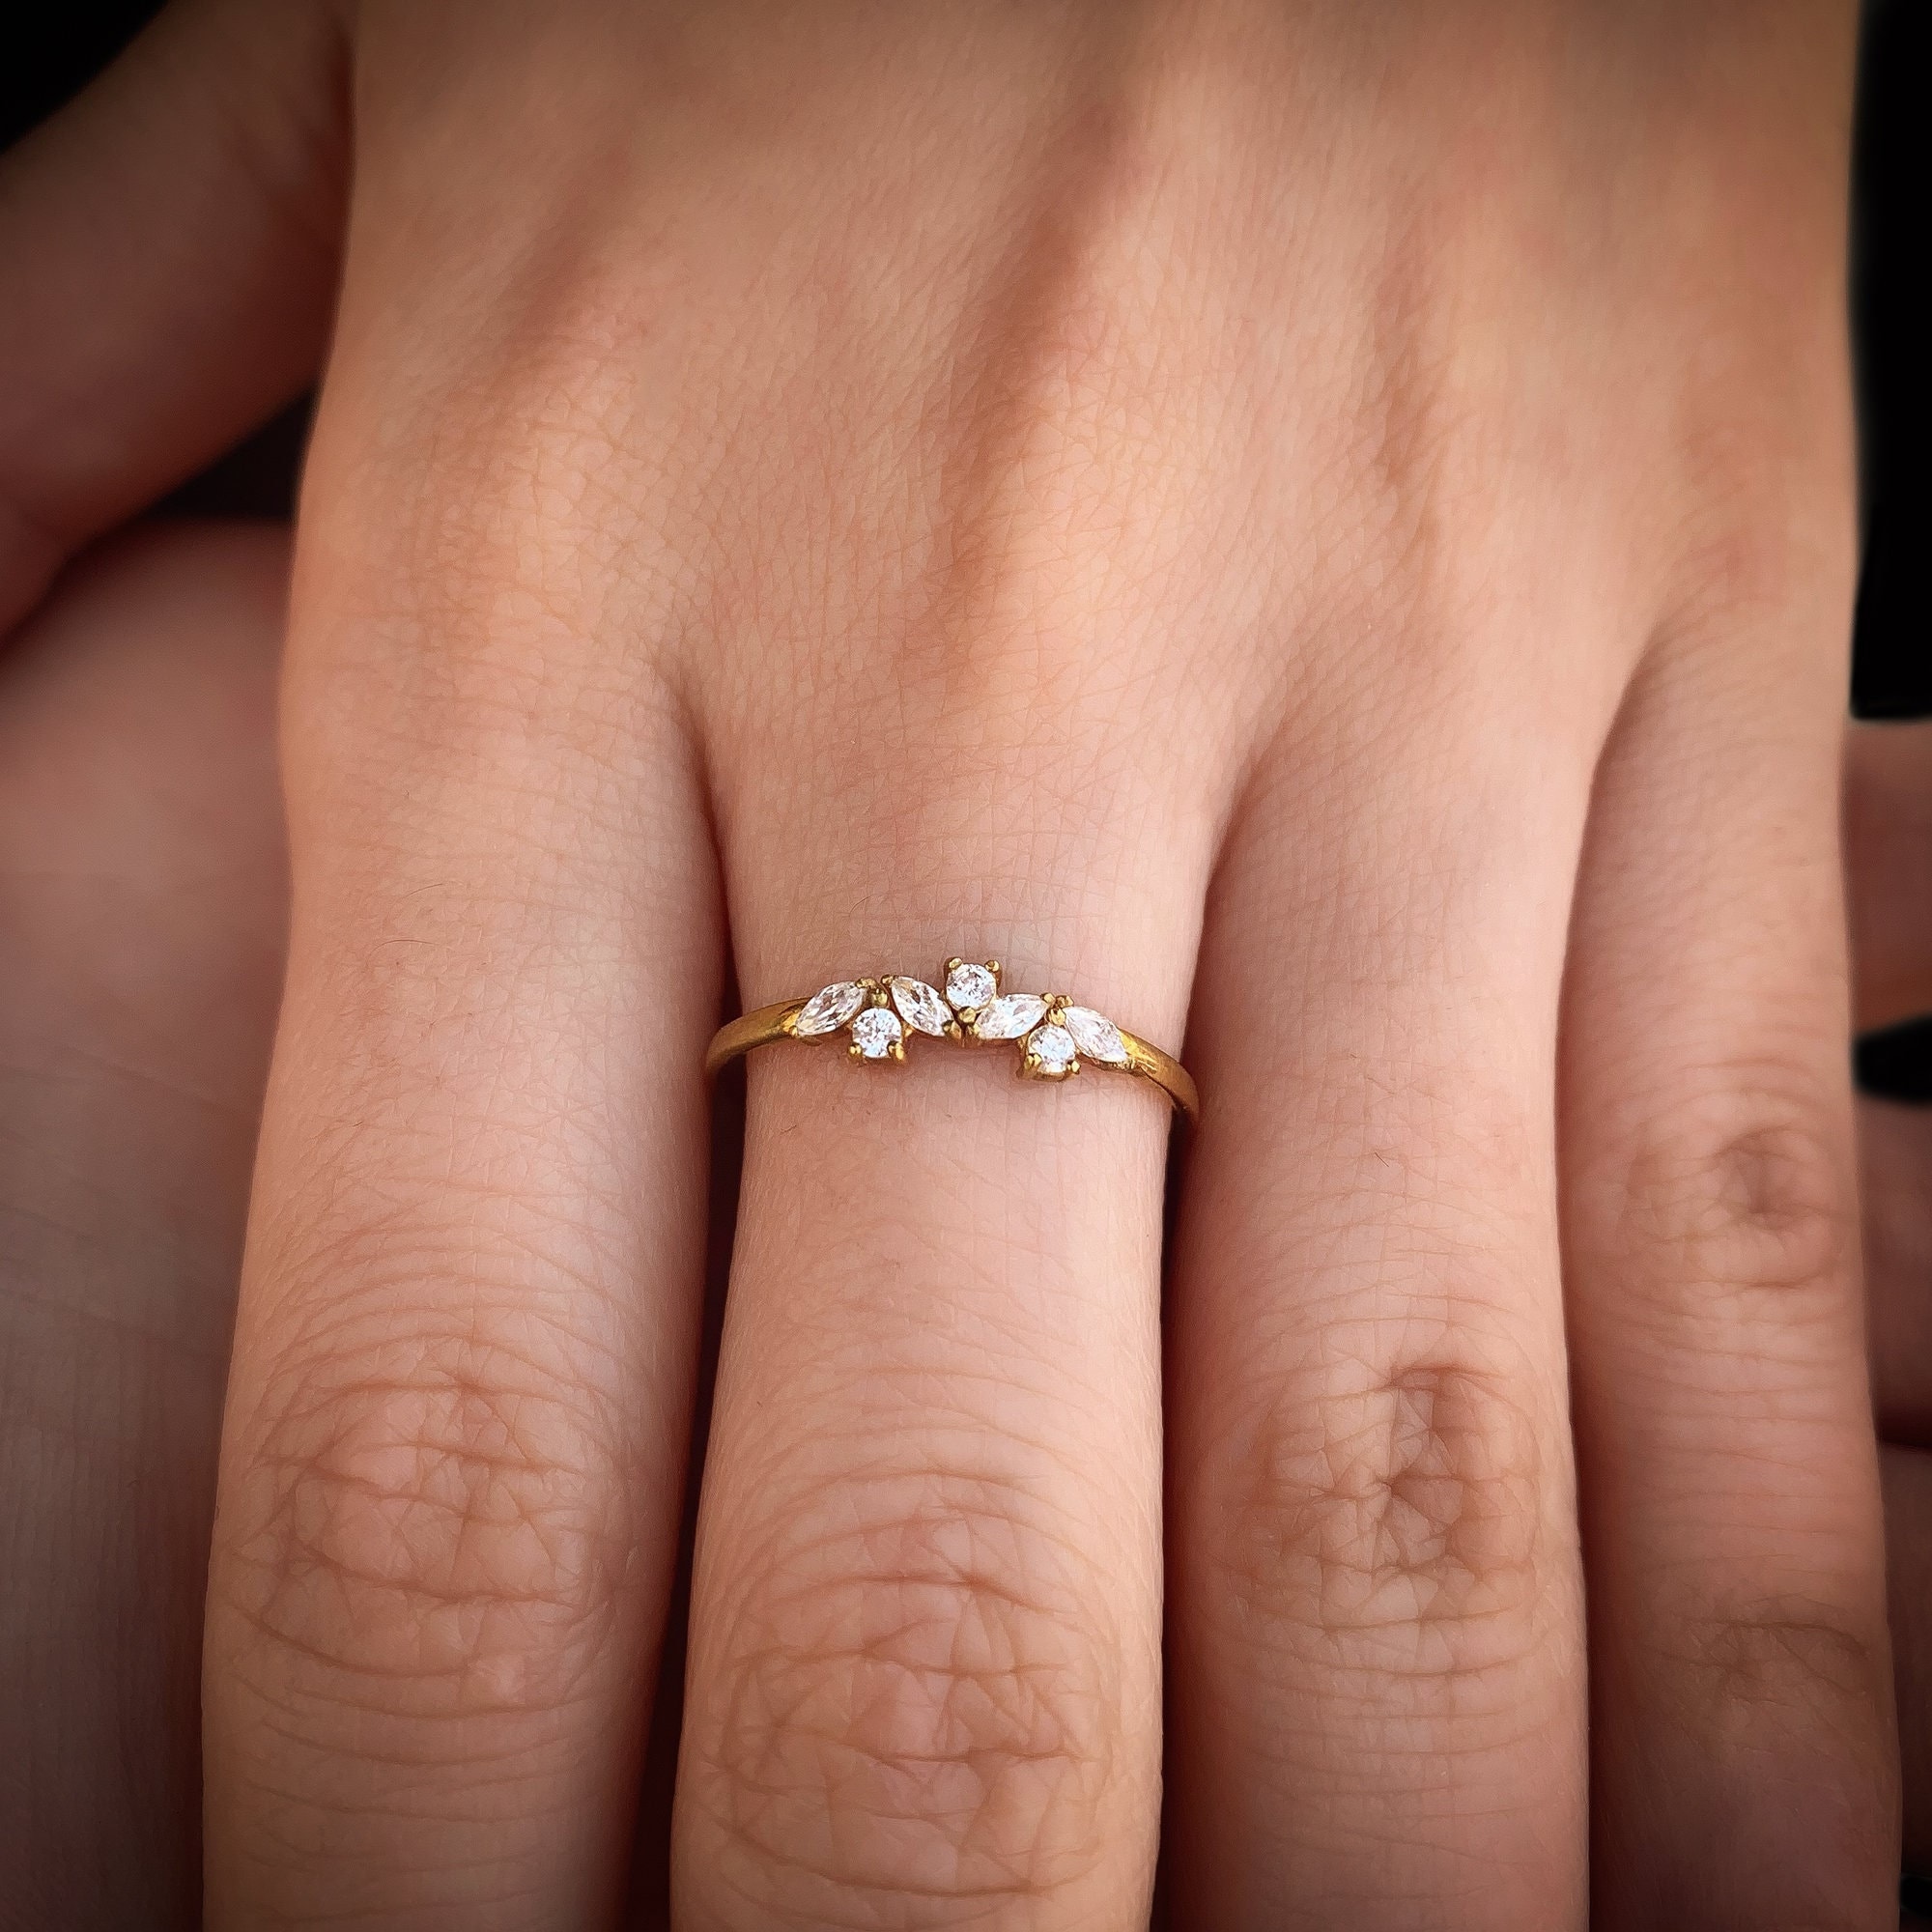 What Is a Promise Ring and What Does It Symbolize?